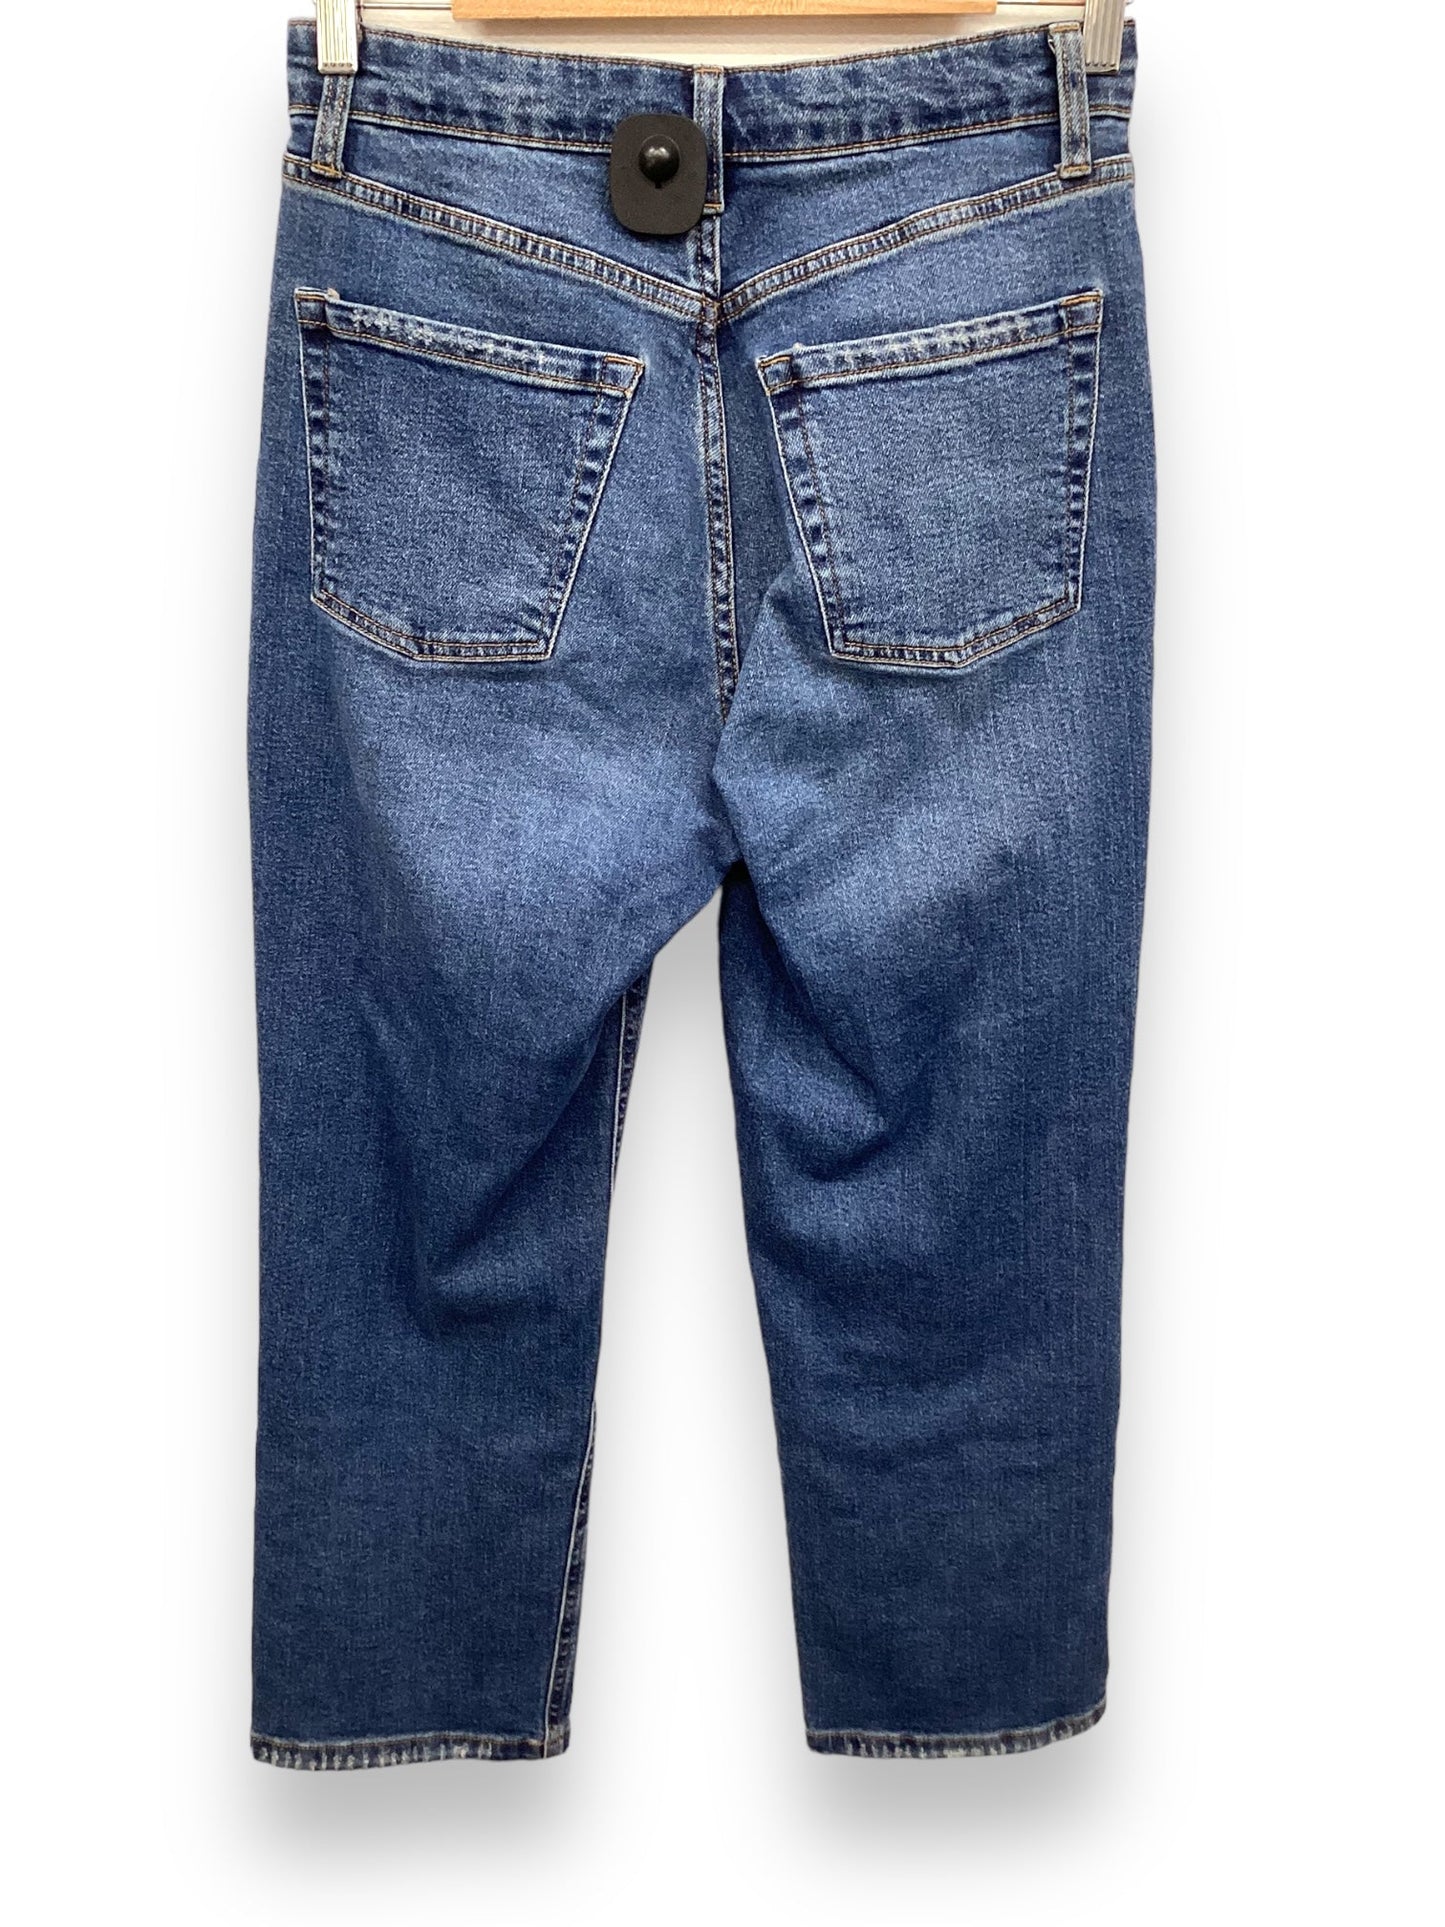 Jeans Straight By Wild Fable  Size: 4